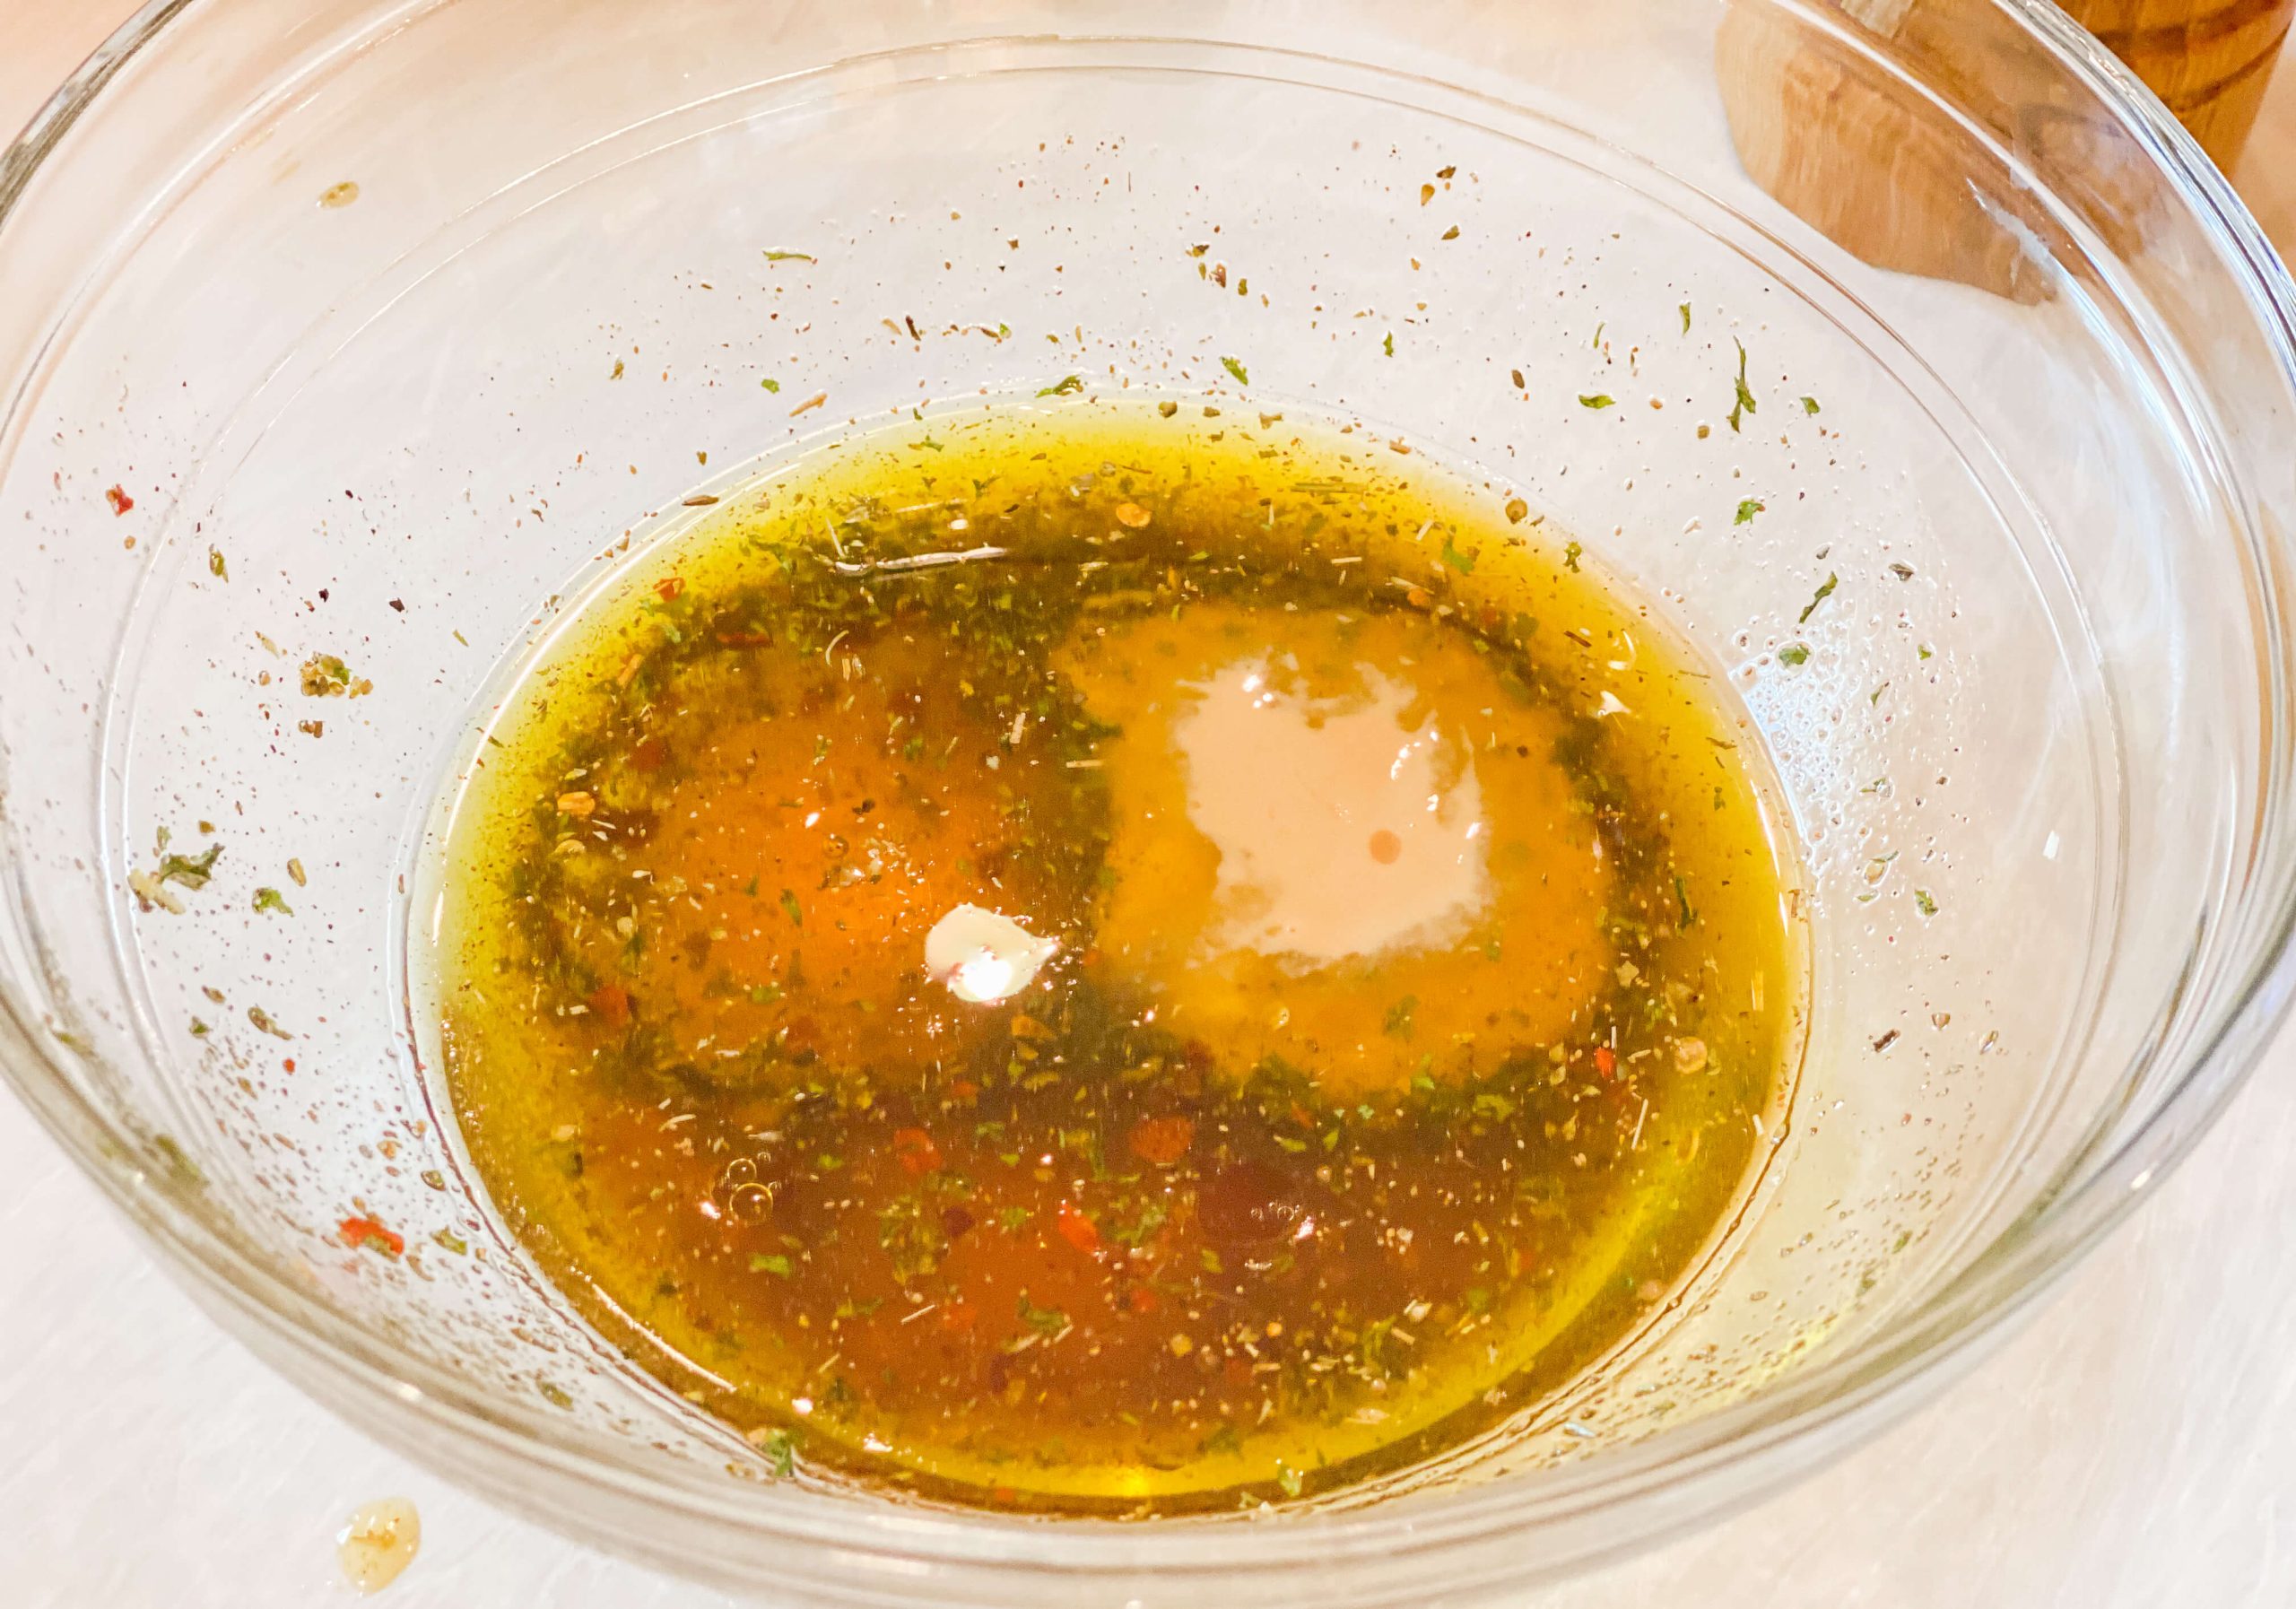 olive oil mixture getting transformed into the vinaigrette 